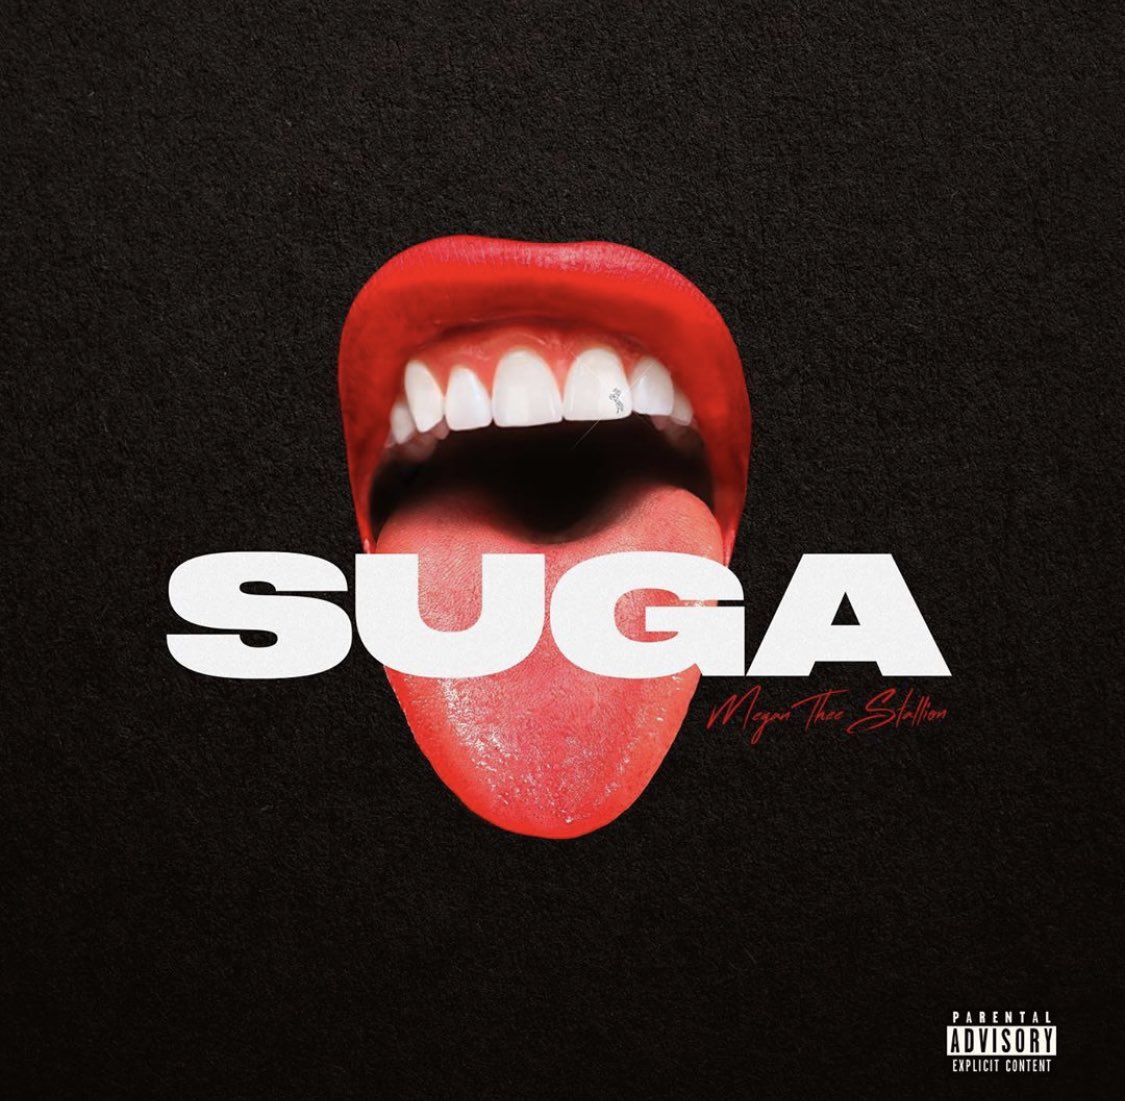 Megan announces new EP “SUGA”. 9 songs. Unbeknown to the world Megan announces she is having issues with her label 1501, and they are not letting her release her new EP. Megan Prevails in court, wins and releases “SUGA” the next following day.